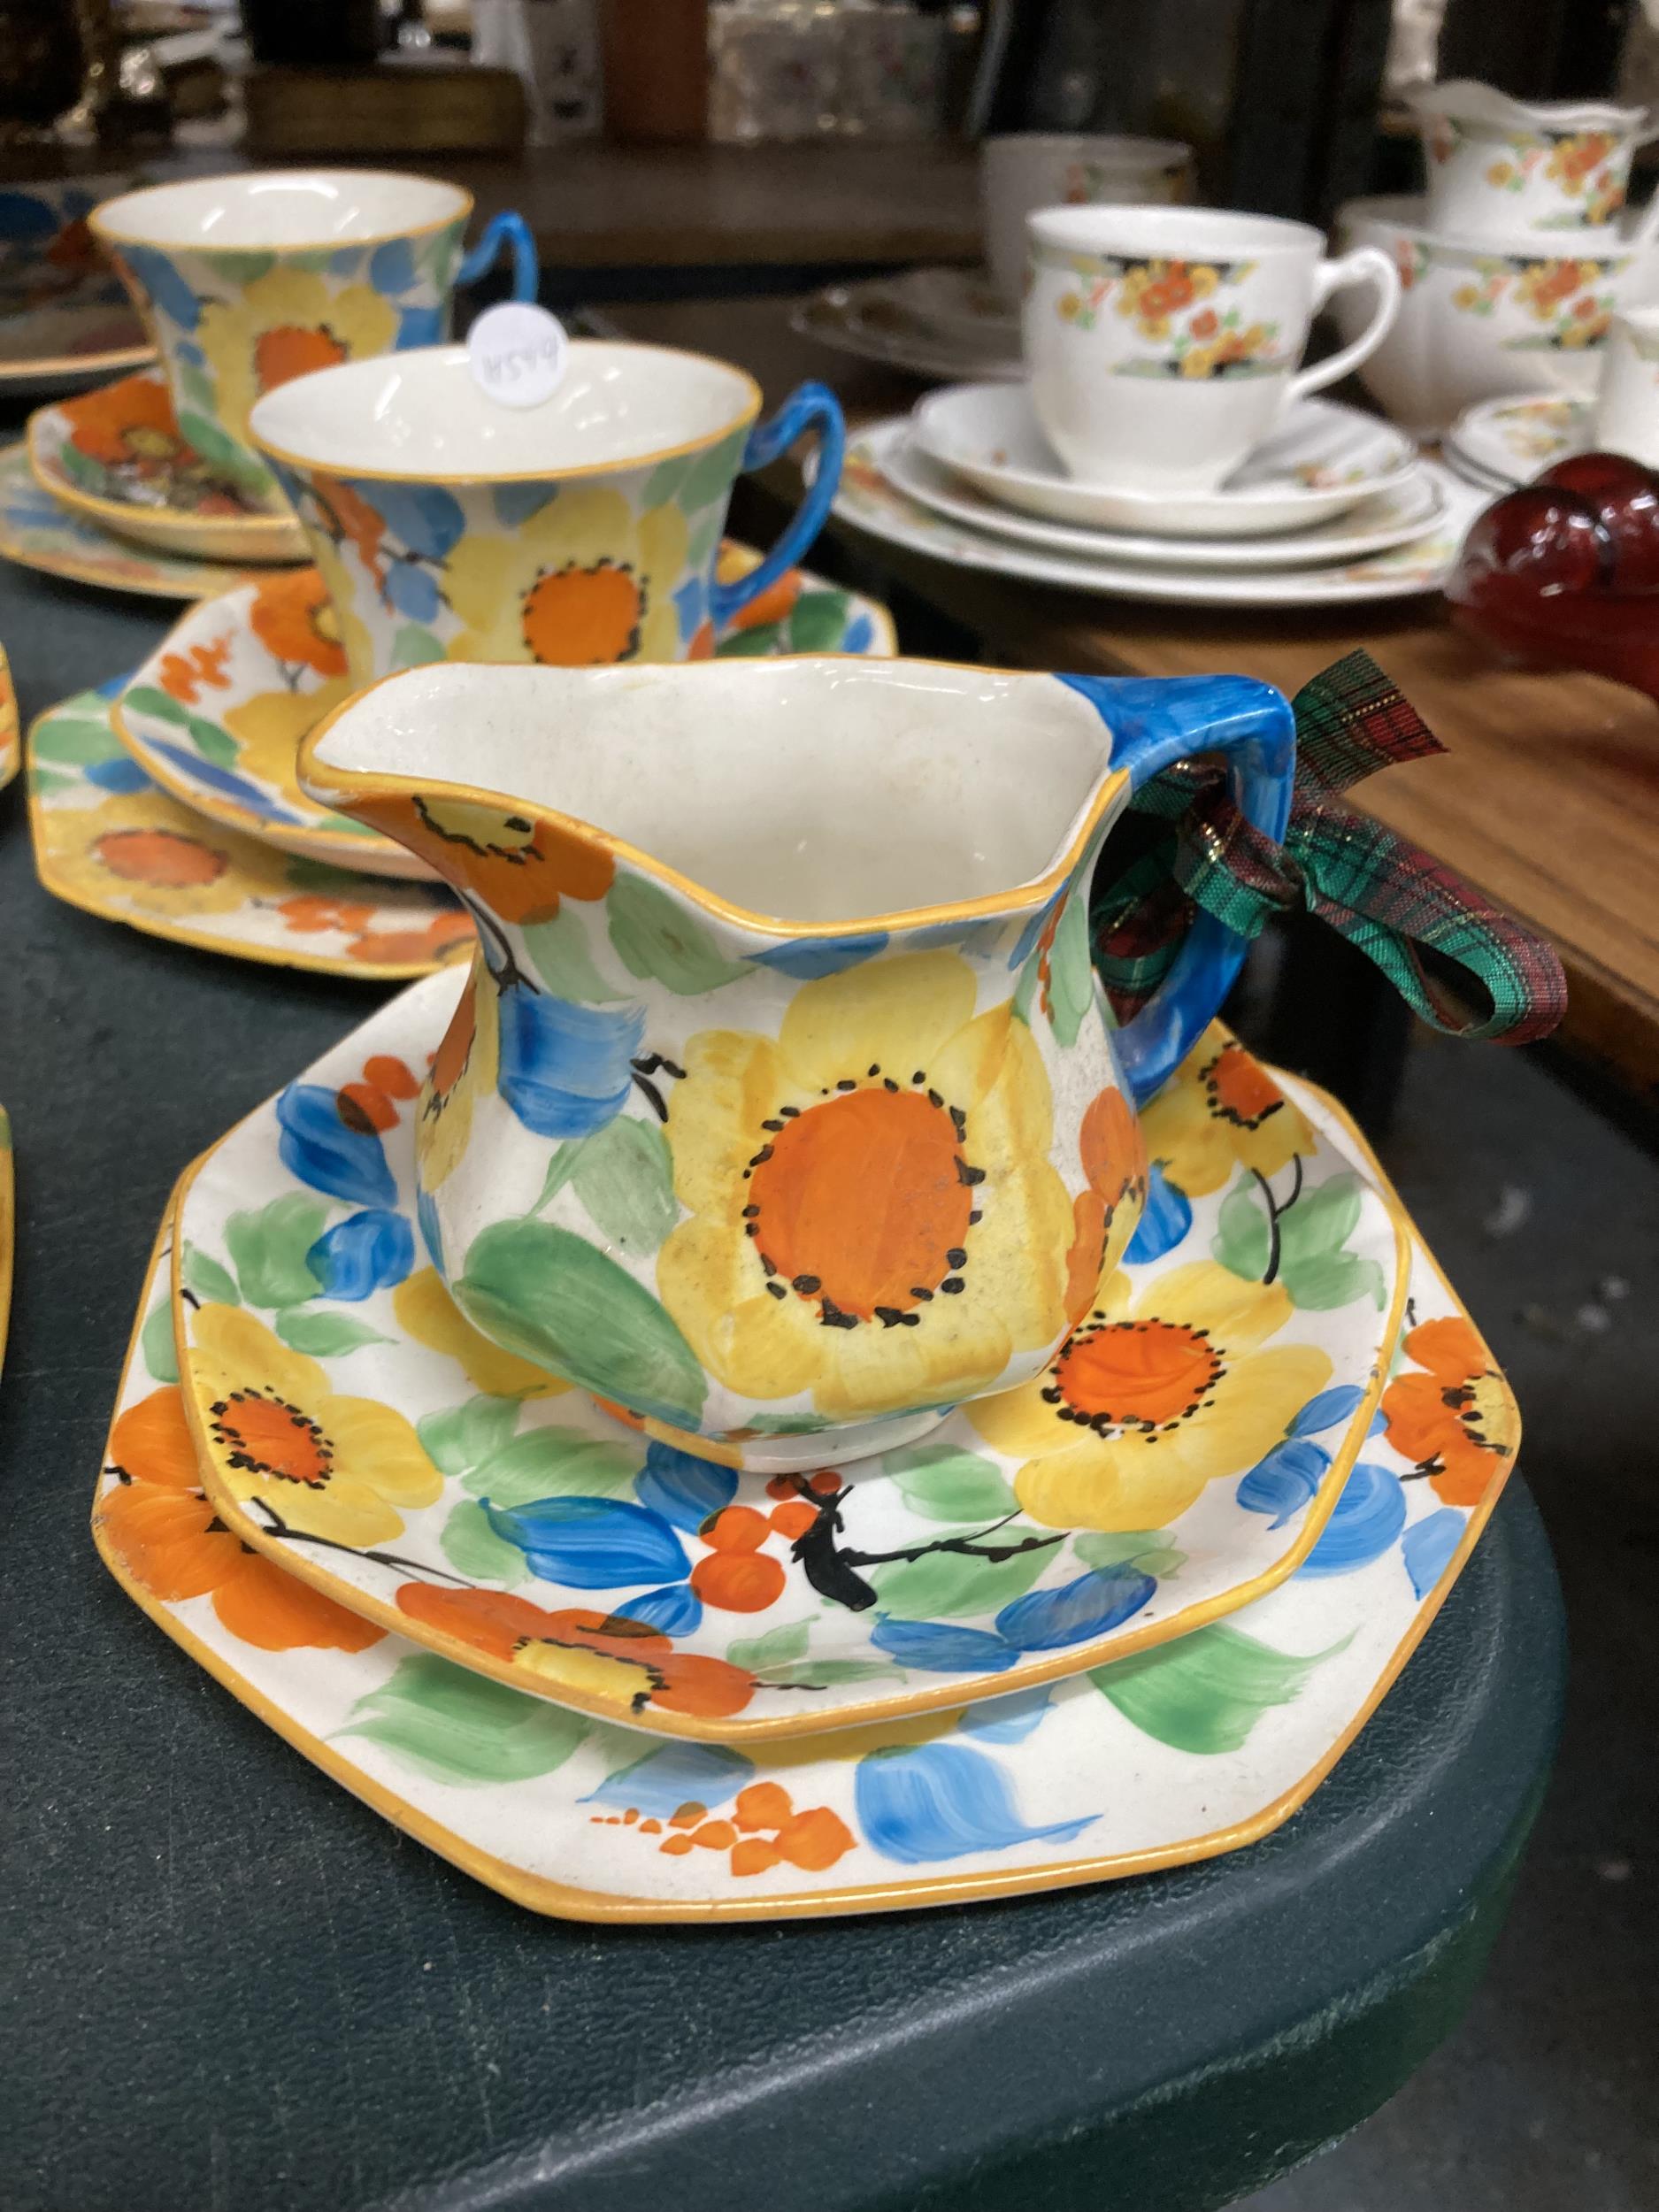 A VINTAGE TEASET IN A FLORAL DESIGN TO INCLUDE A CAKE PLATE, CUPS, SAUCERS, SIDE PLATES, A CREAM JUG - Image 2 of 3